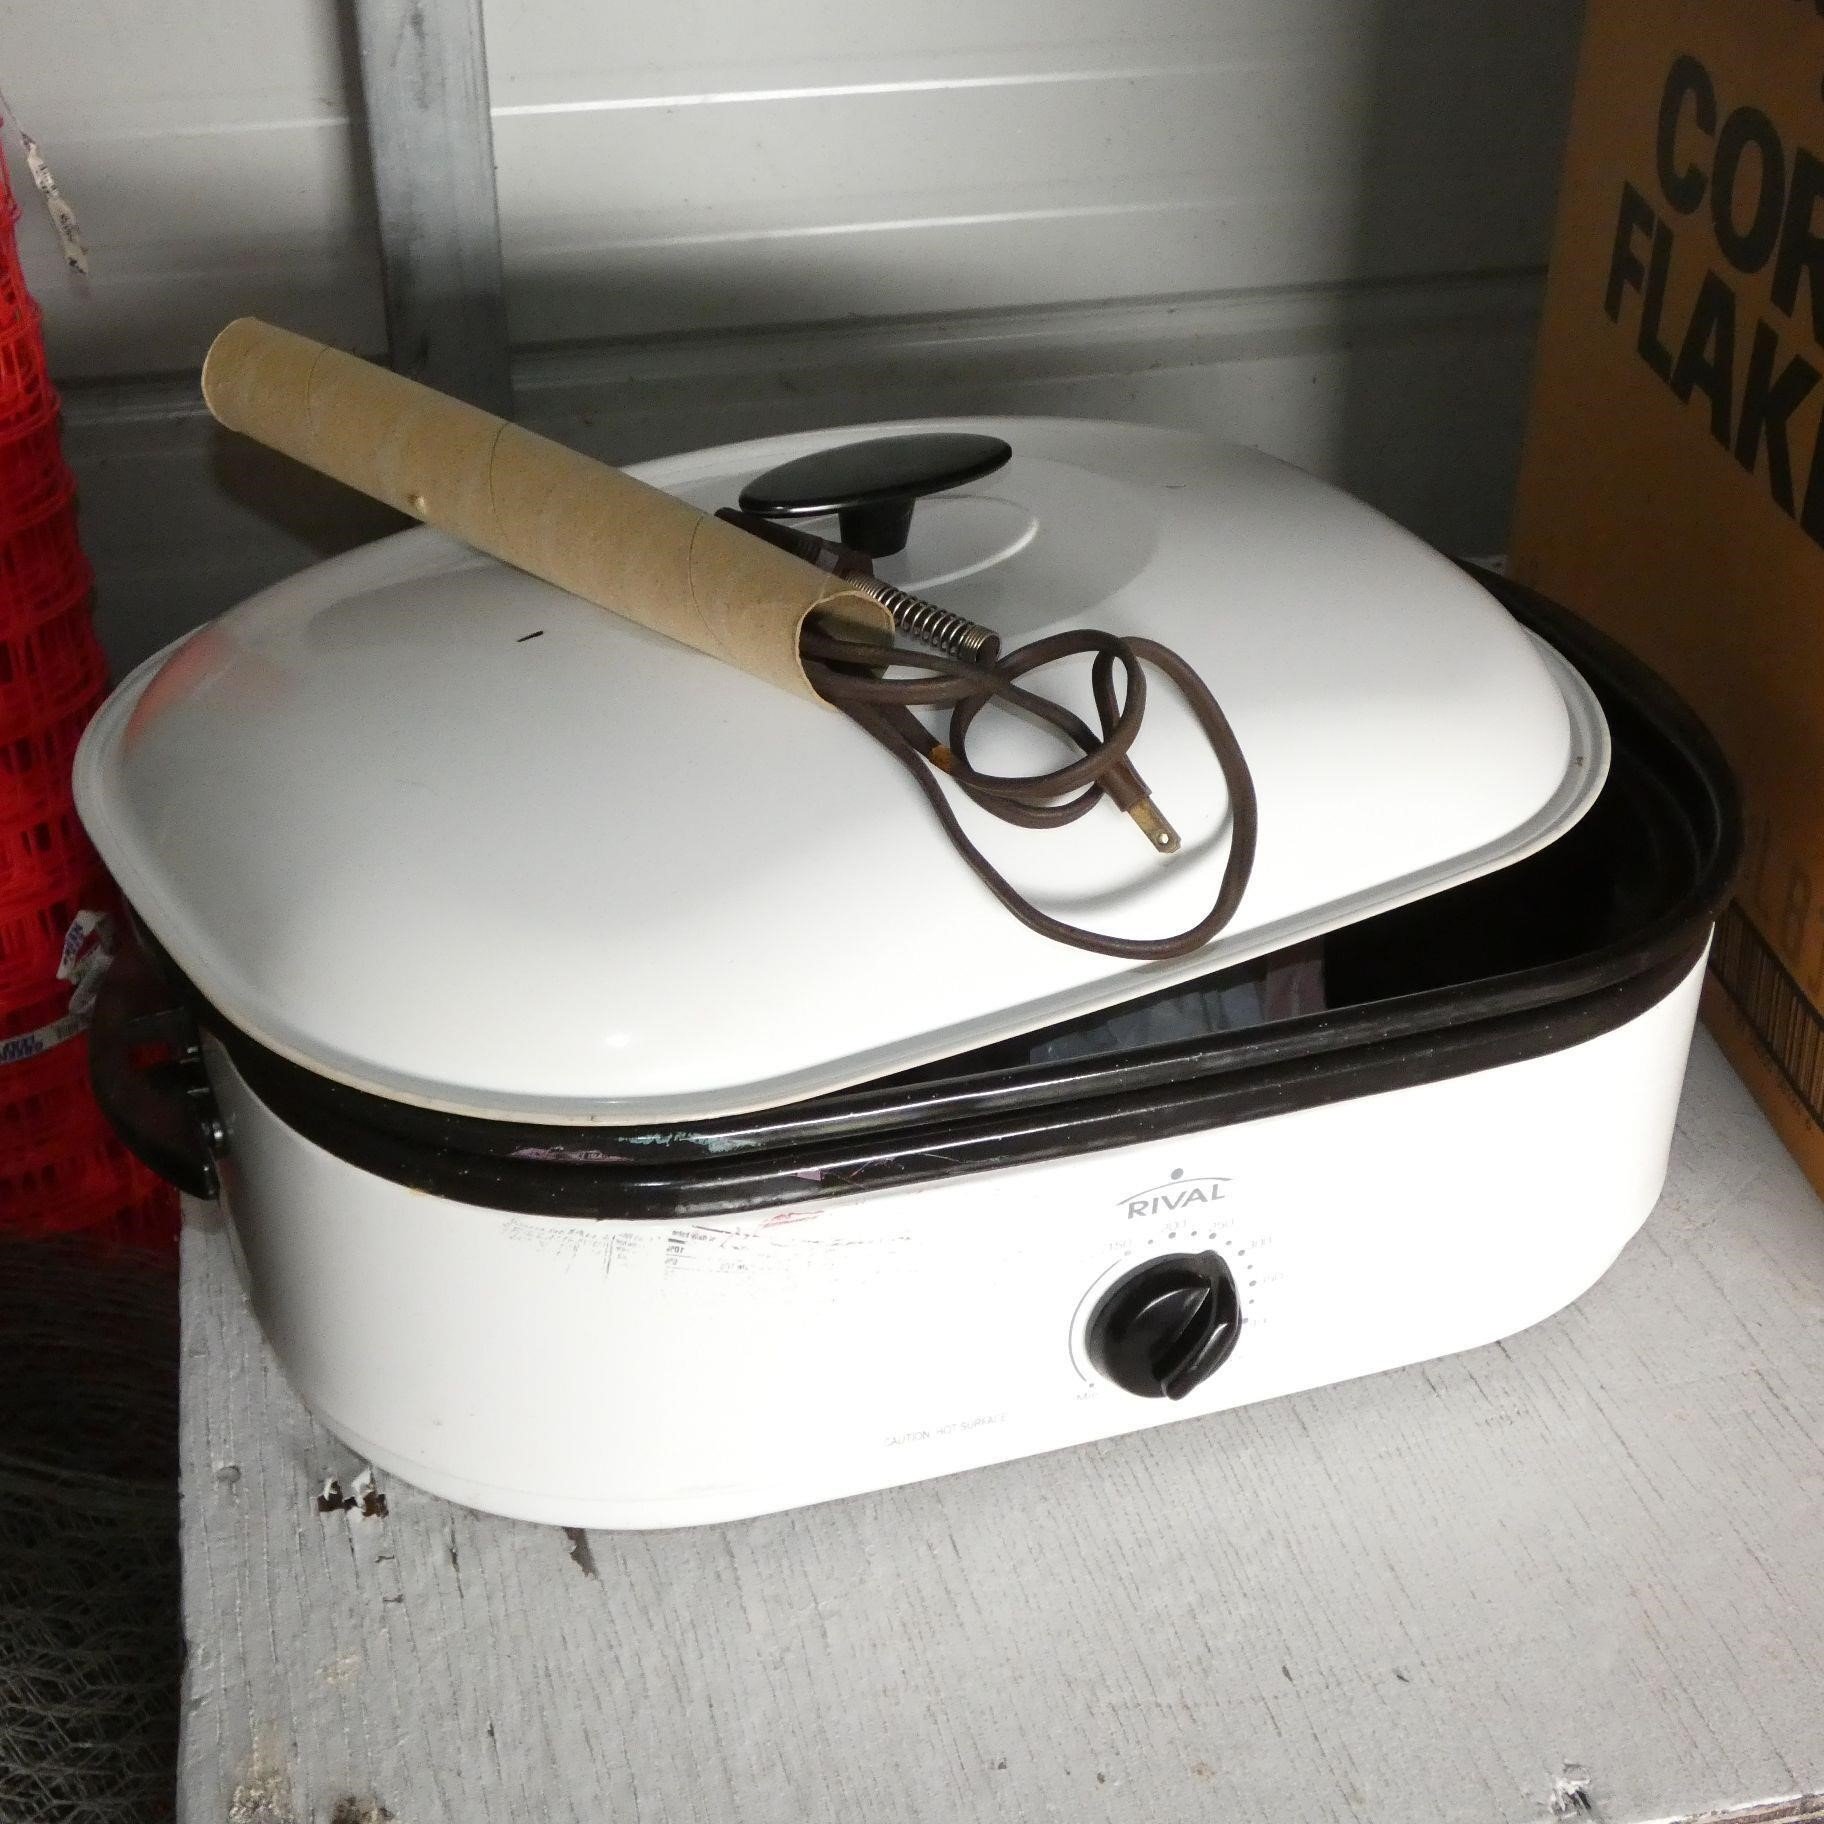 Rival Slow Cooker & Lid